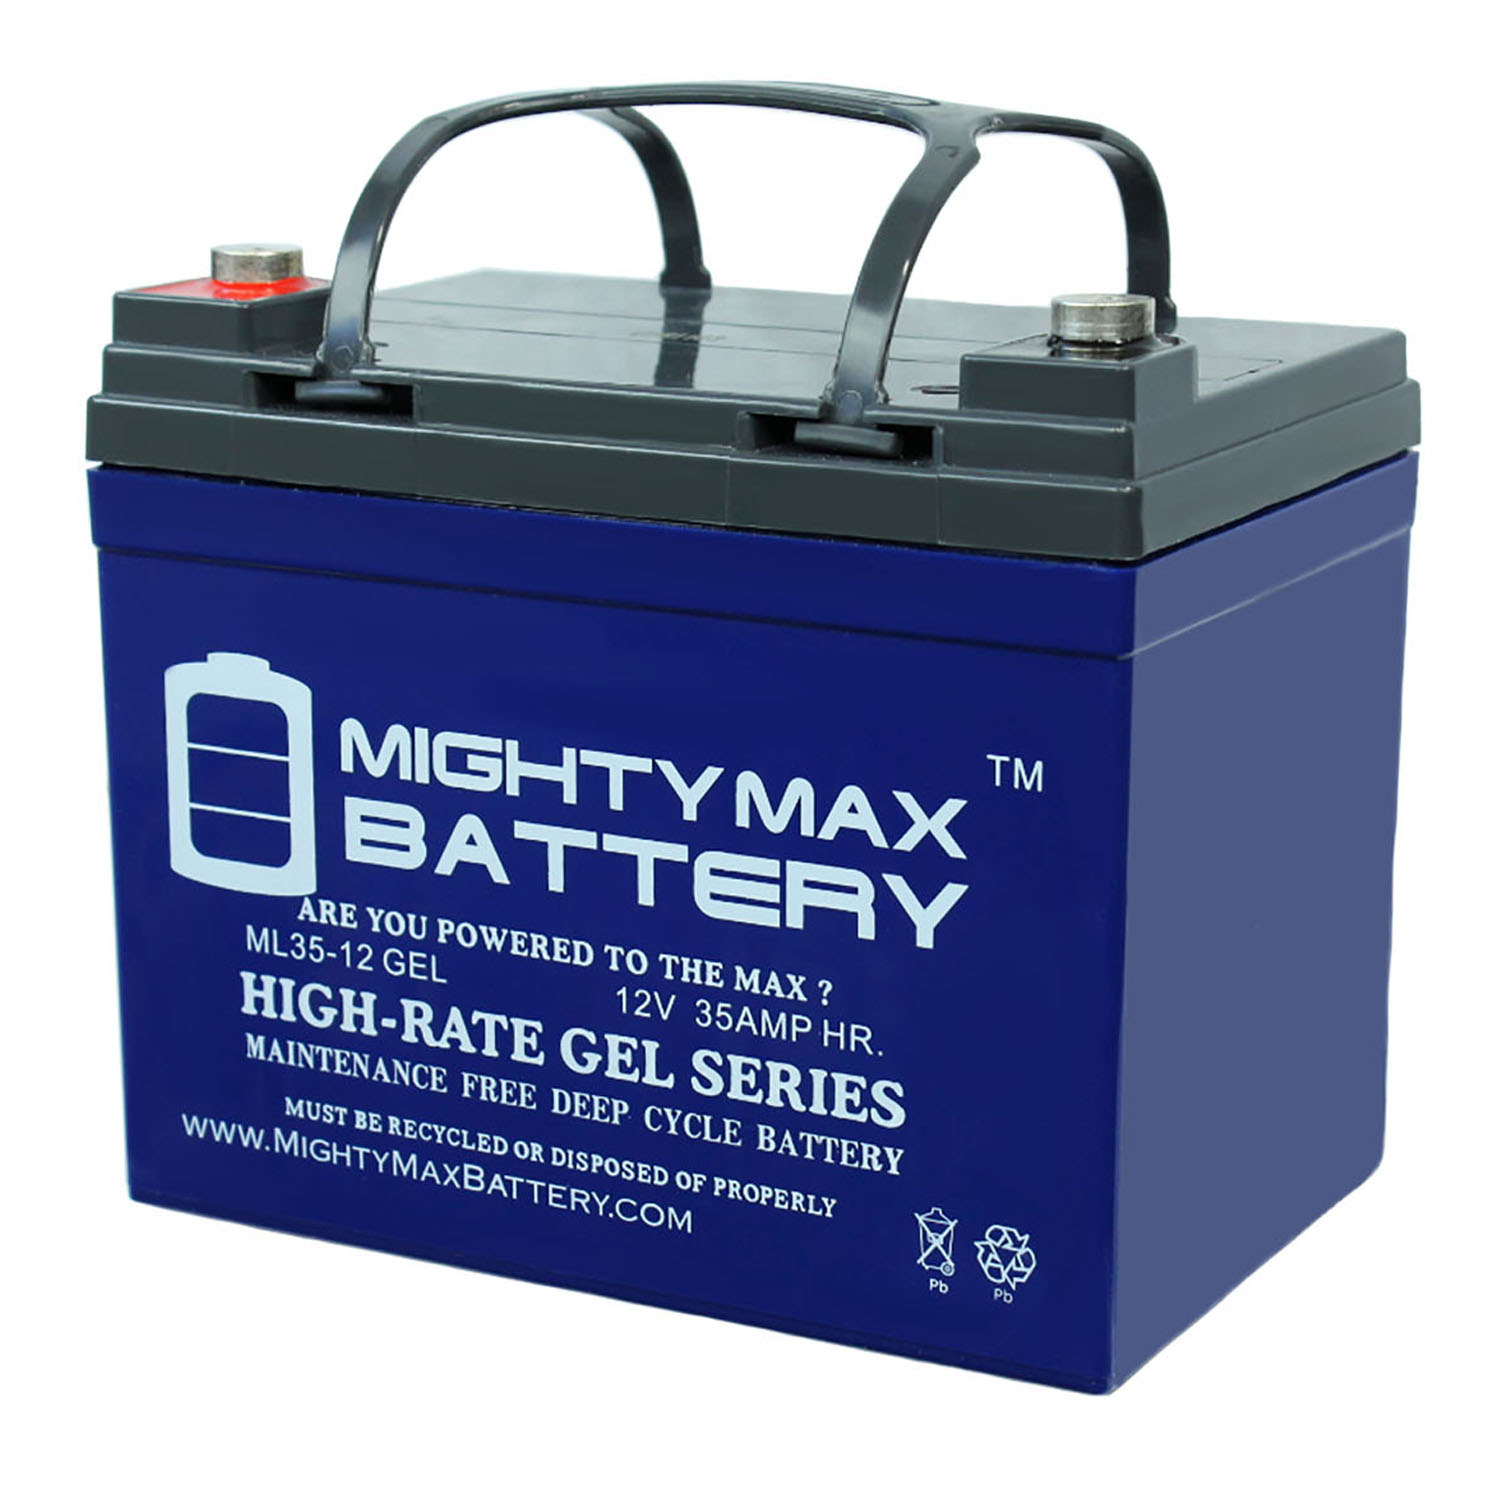 Mighty Max Battery 12V 35AH Gel Replacement Battery for APC UPS Computer Backup 2 Pack Brand Product